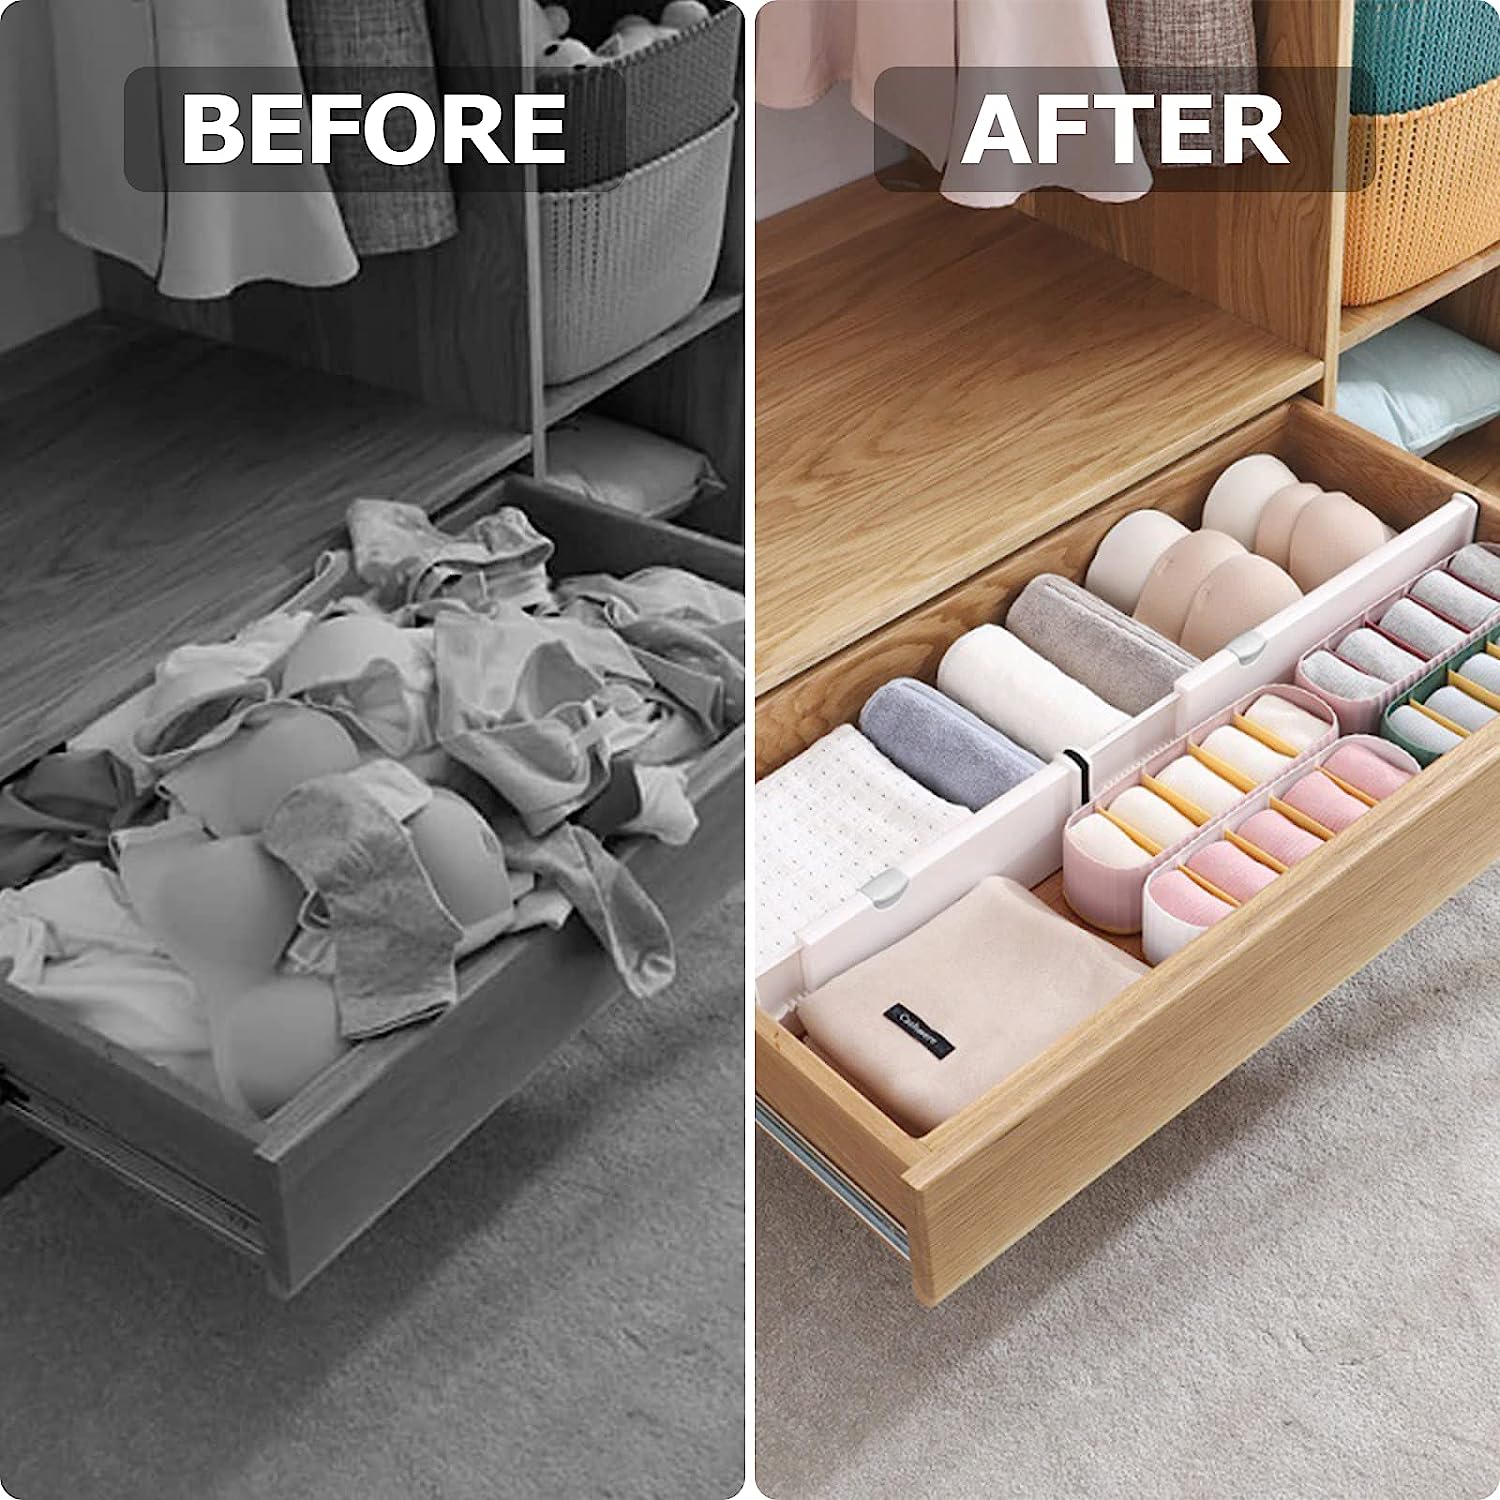 Before and after use of drawer separator